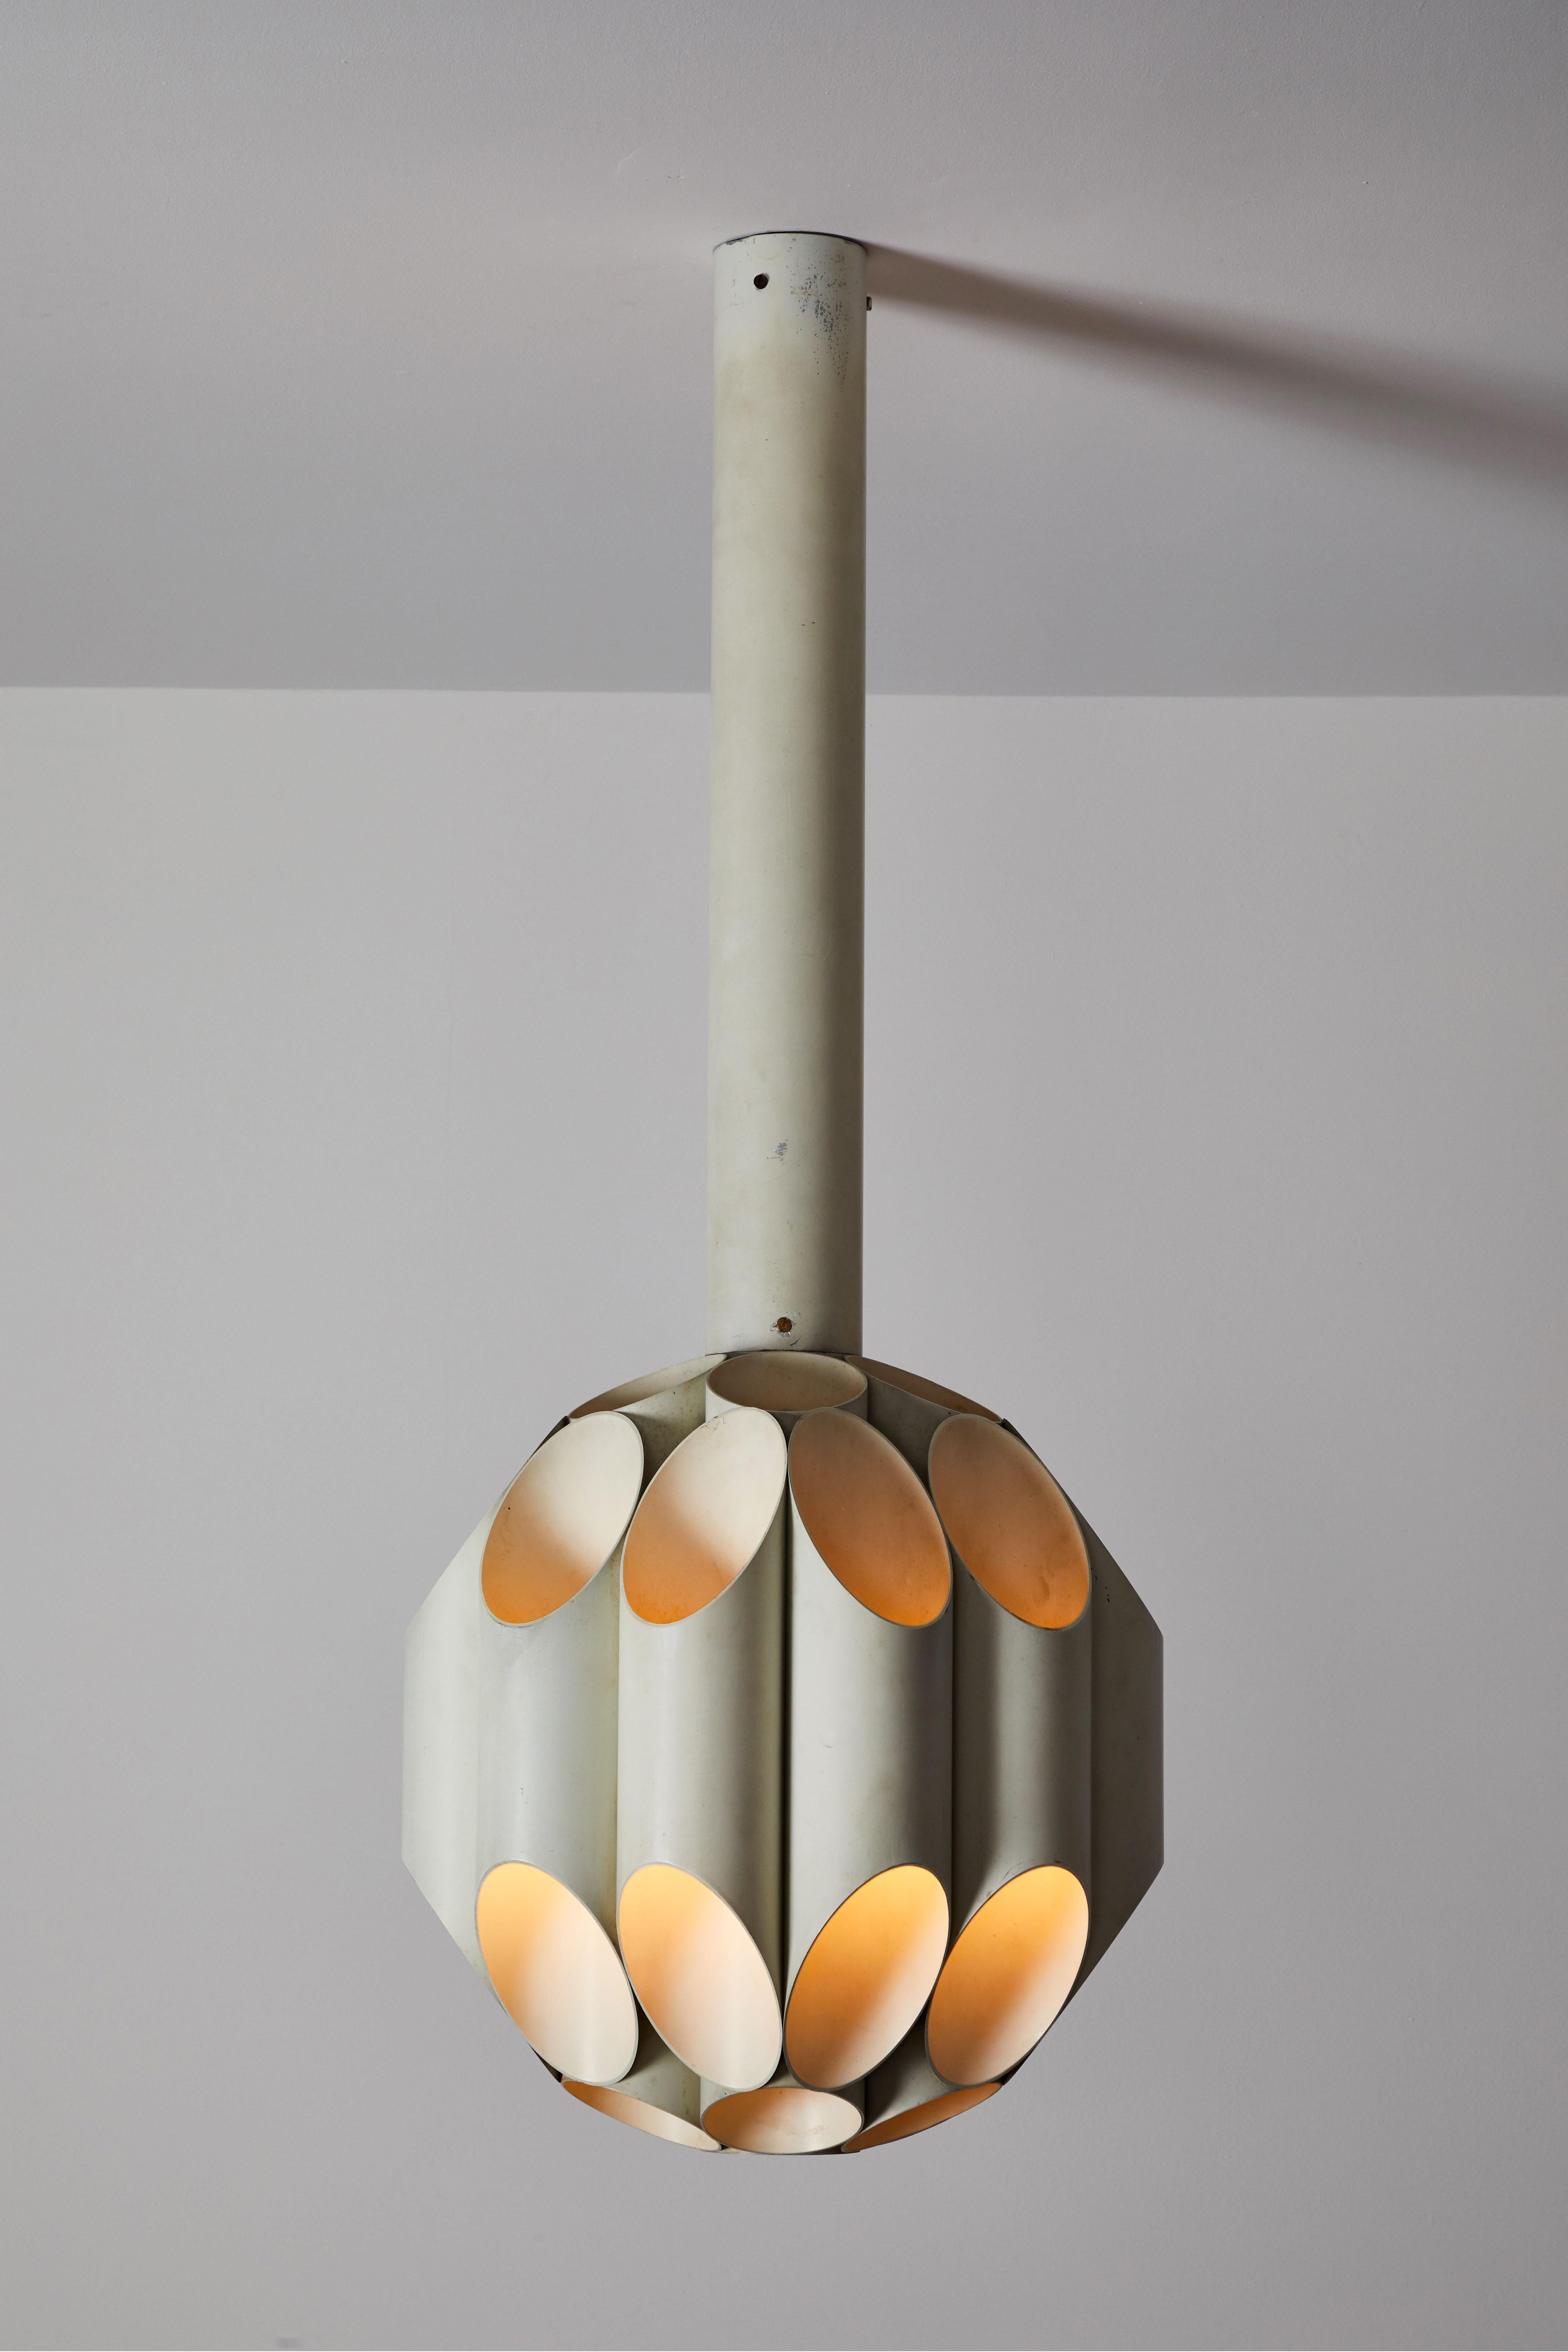 Carciofo pendant by Gianni Celadai for Fontana Arte in the 1970s. Rewired for US Junction boxes. Takes 19 E14 European candelabra 25W maximum bulbs. Bulbs provided as a one time courtesy.
OAH: 47.75